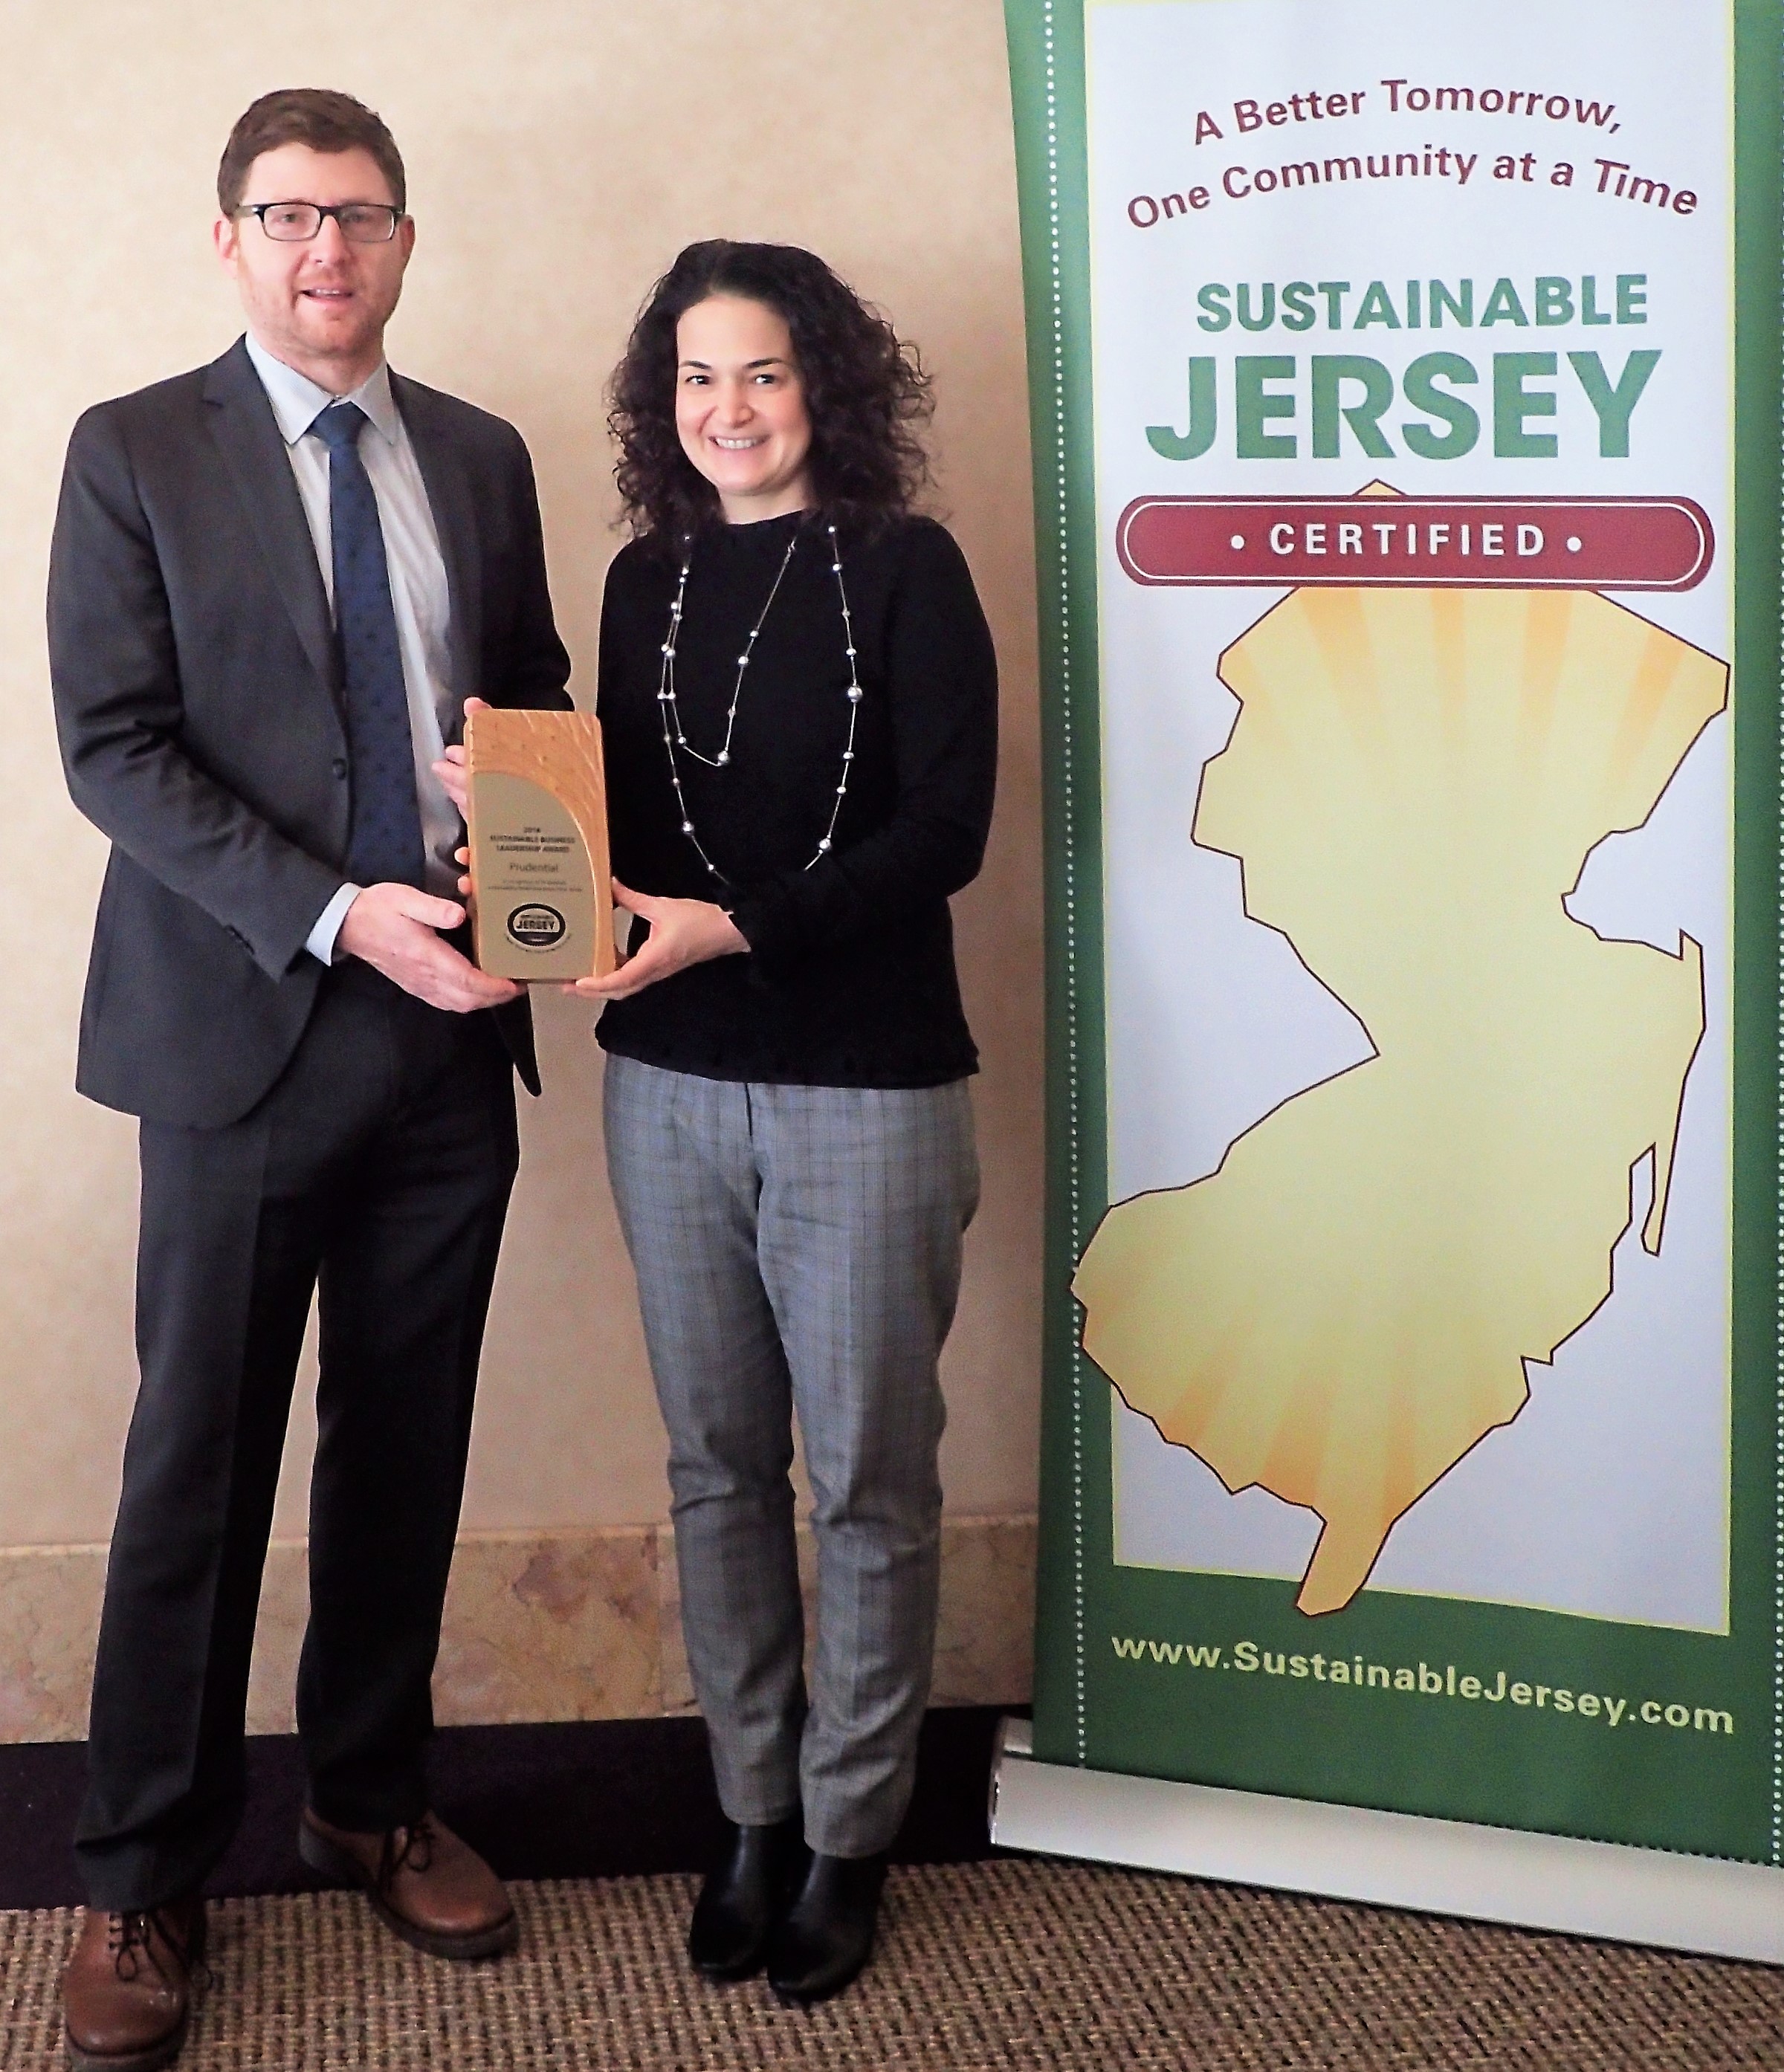 Randall Solomon, Co-Director, Sustainable Jersey and Suzanne Klatt, Director of Environment and Sustainability for Prudential.  